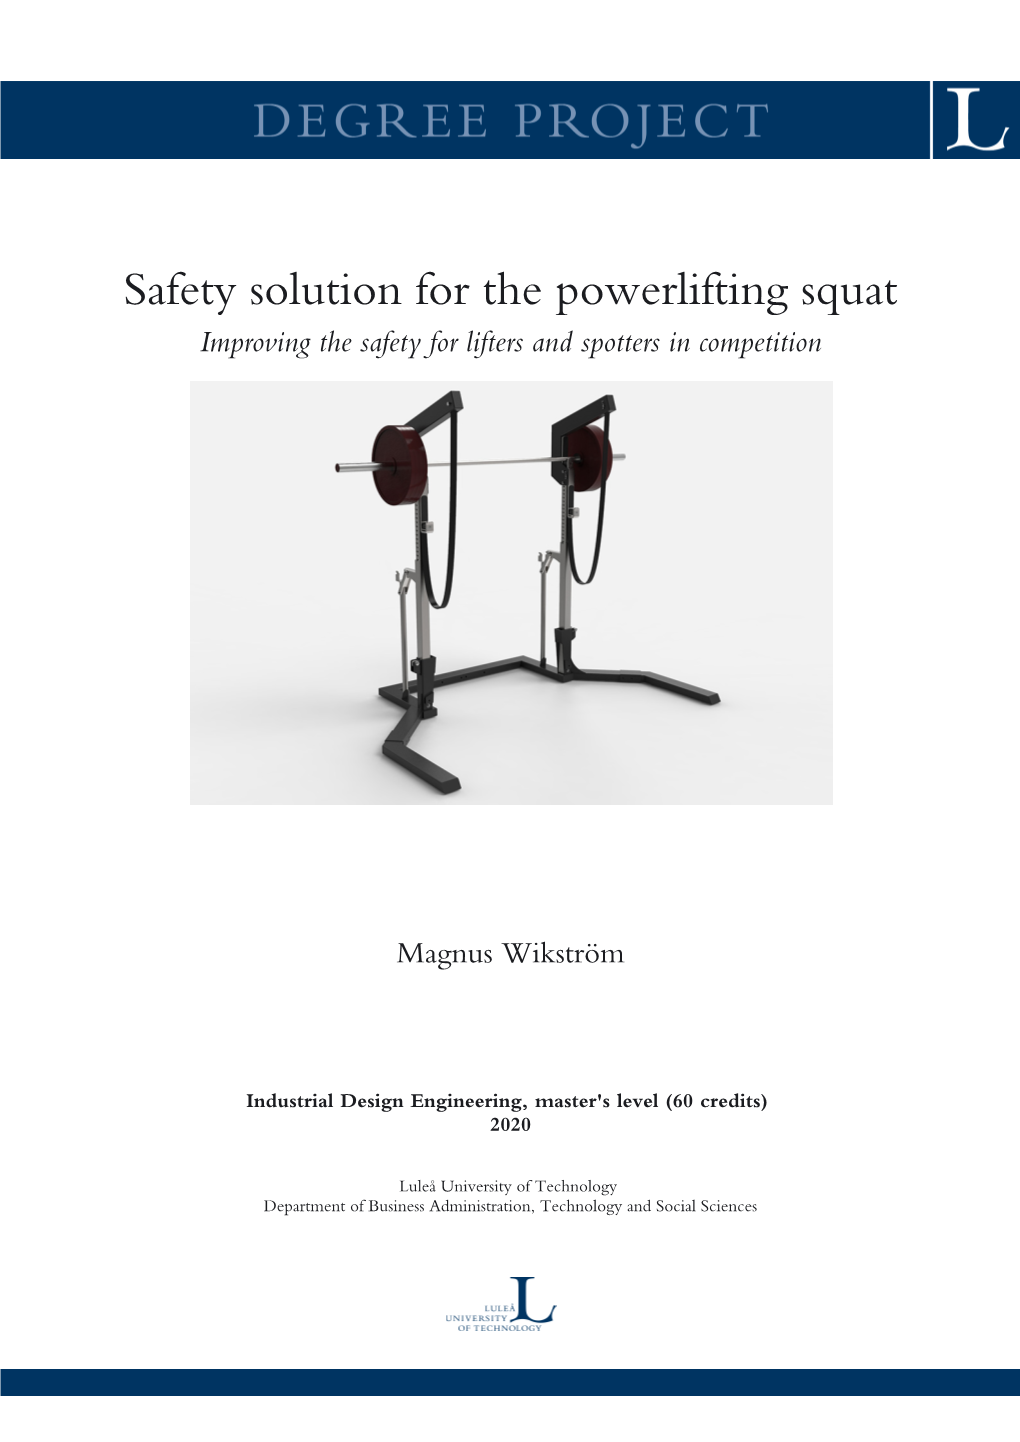 Safety Solution for the Powerlifting Squat Improving the Safety for Lifters and Spotters in Competition